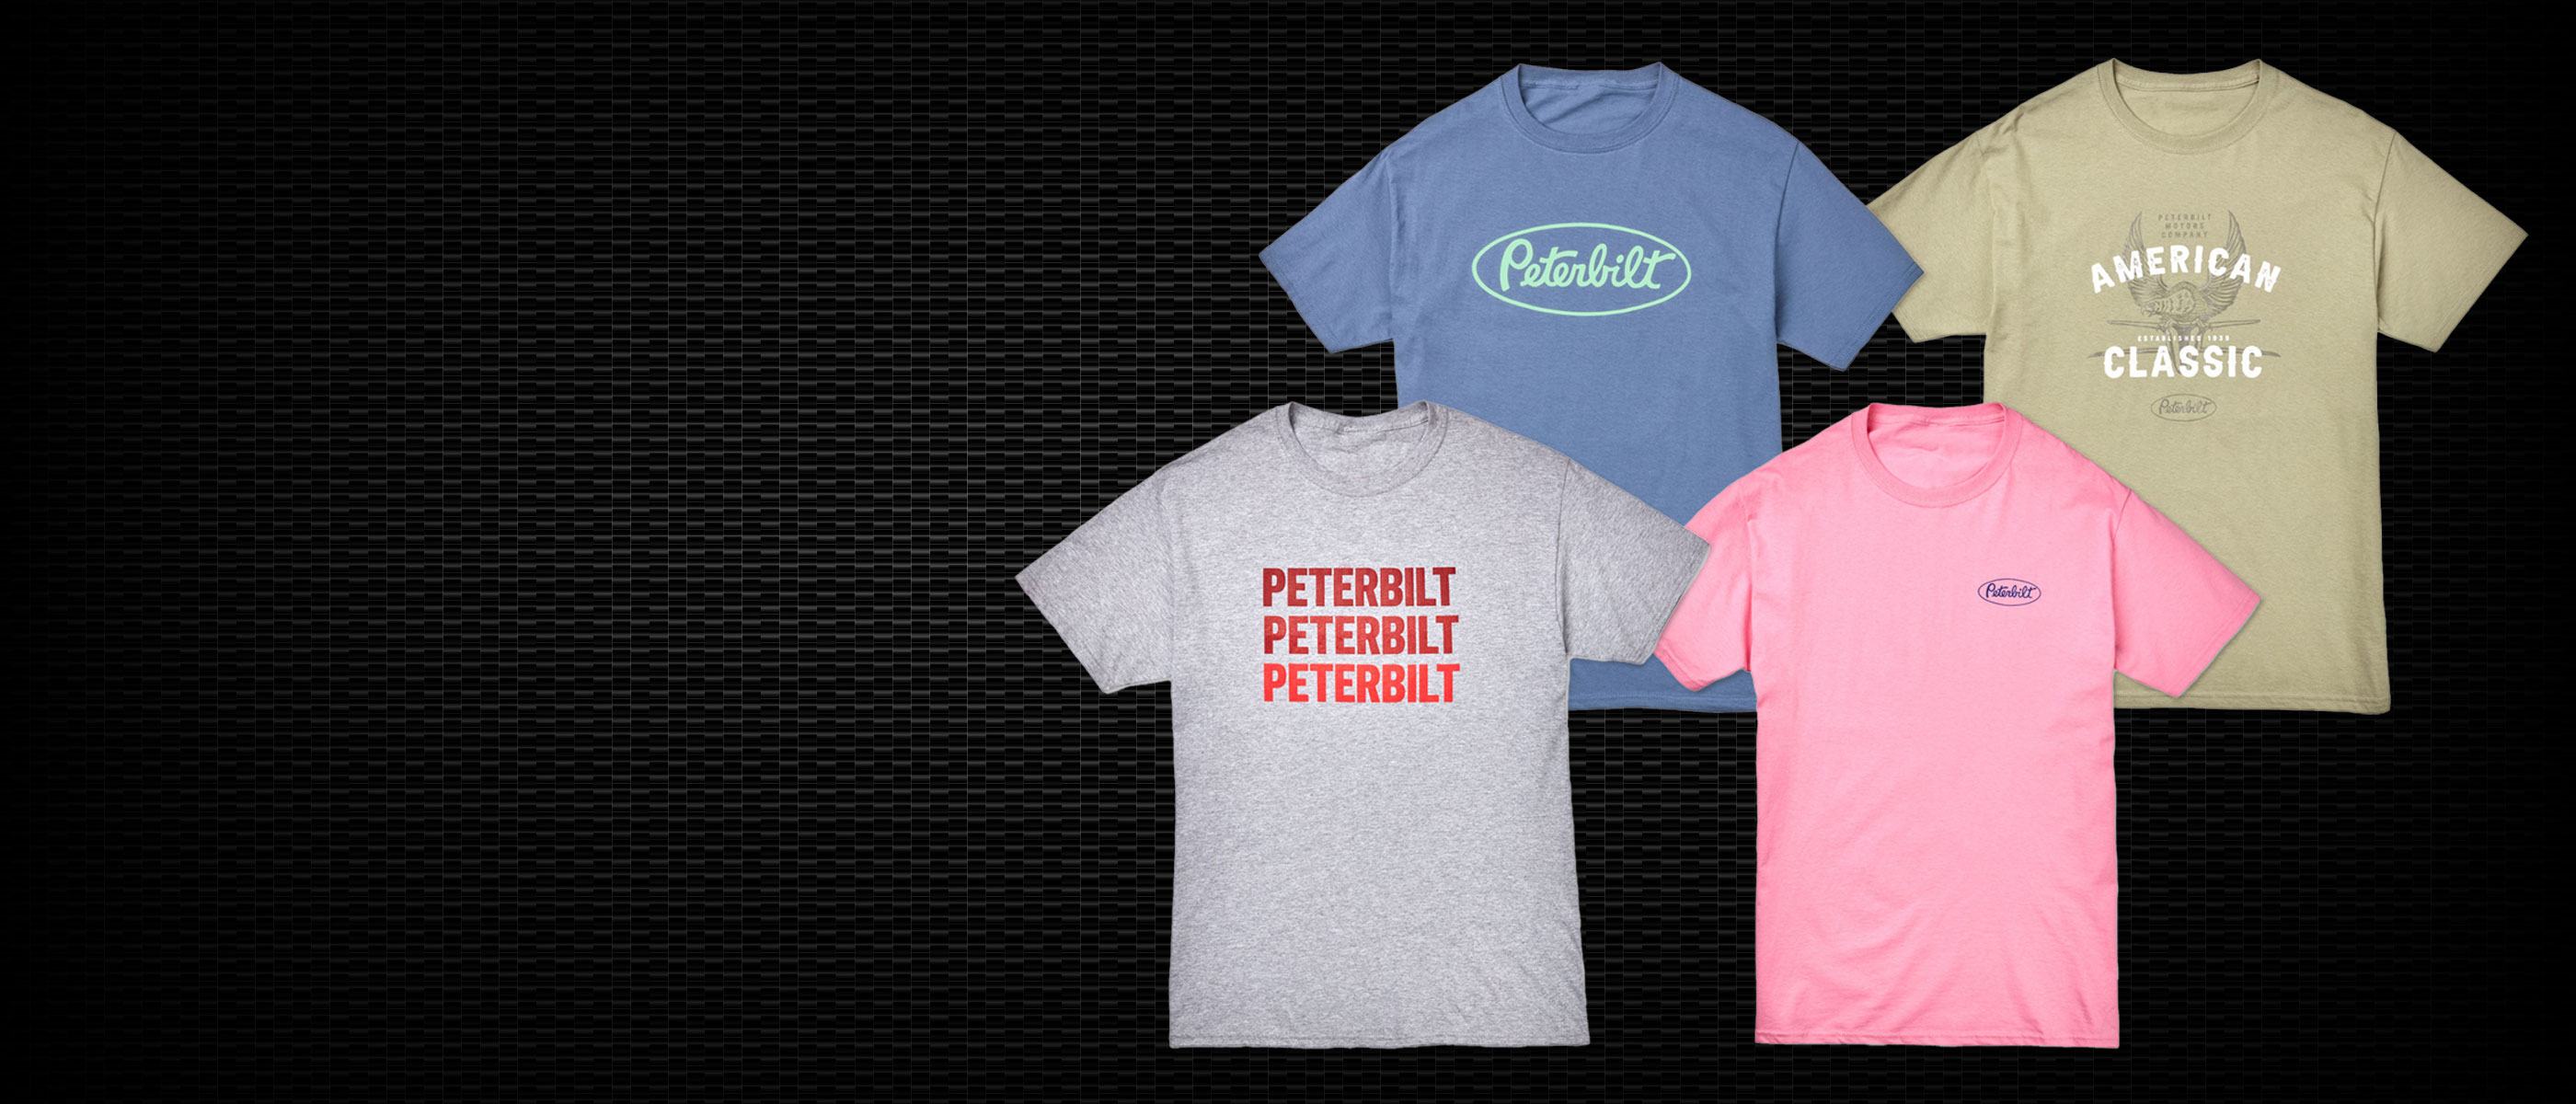 Check out all the new Tees available now!